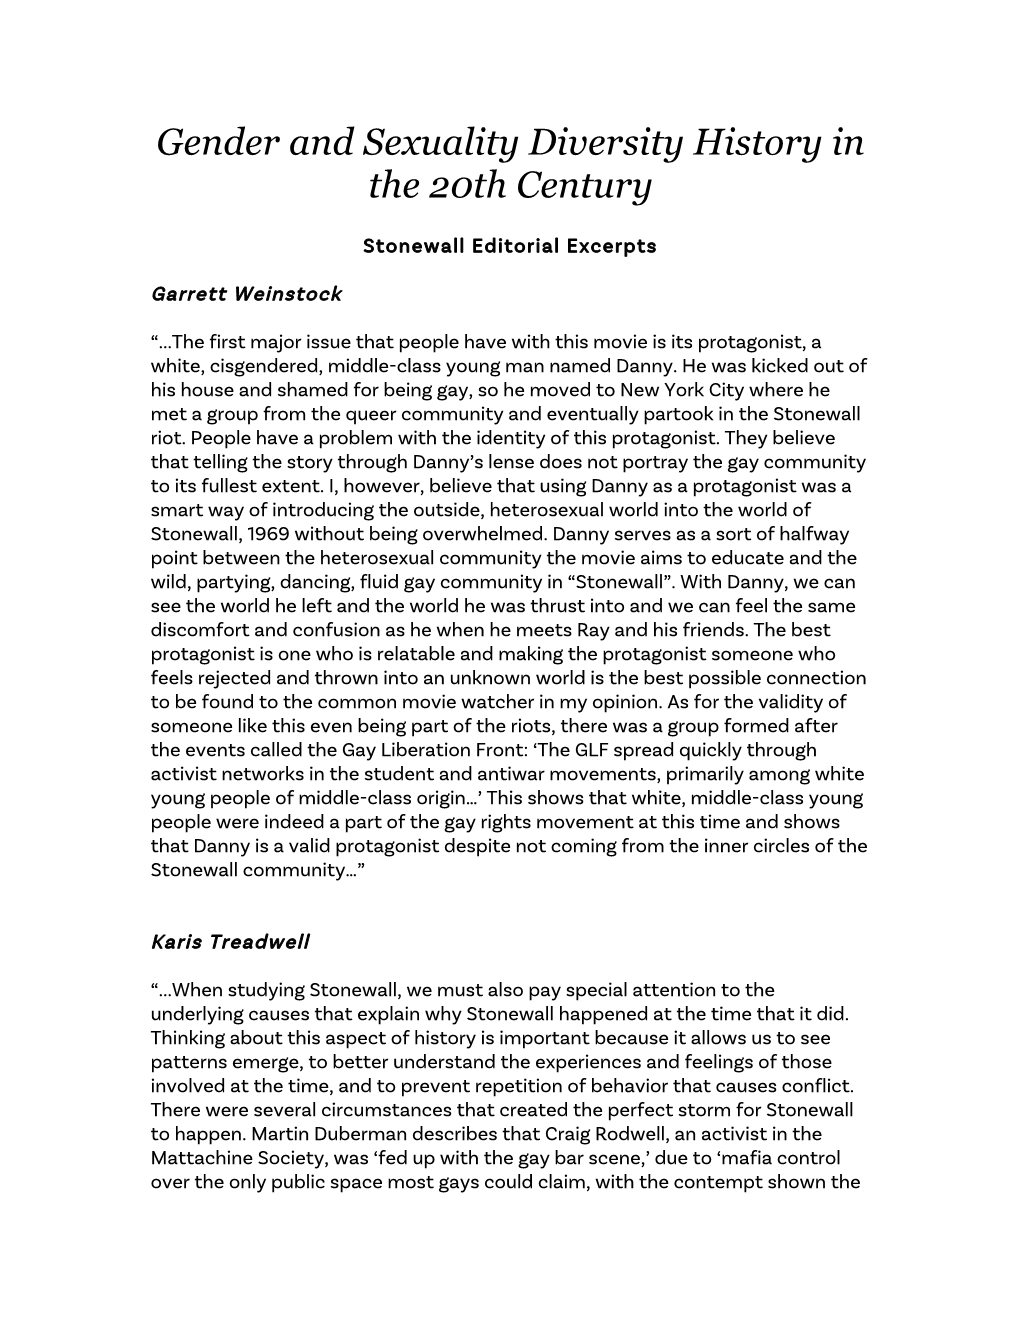 Gender and Sexuality Diversity History in the 20Th Century